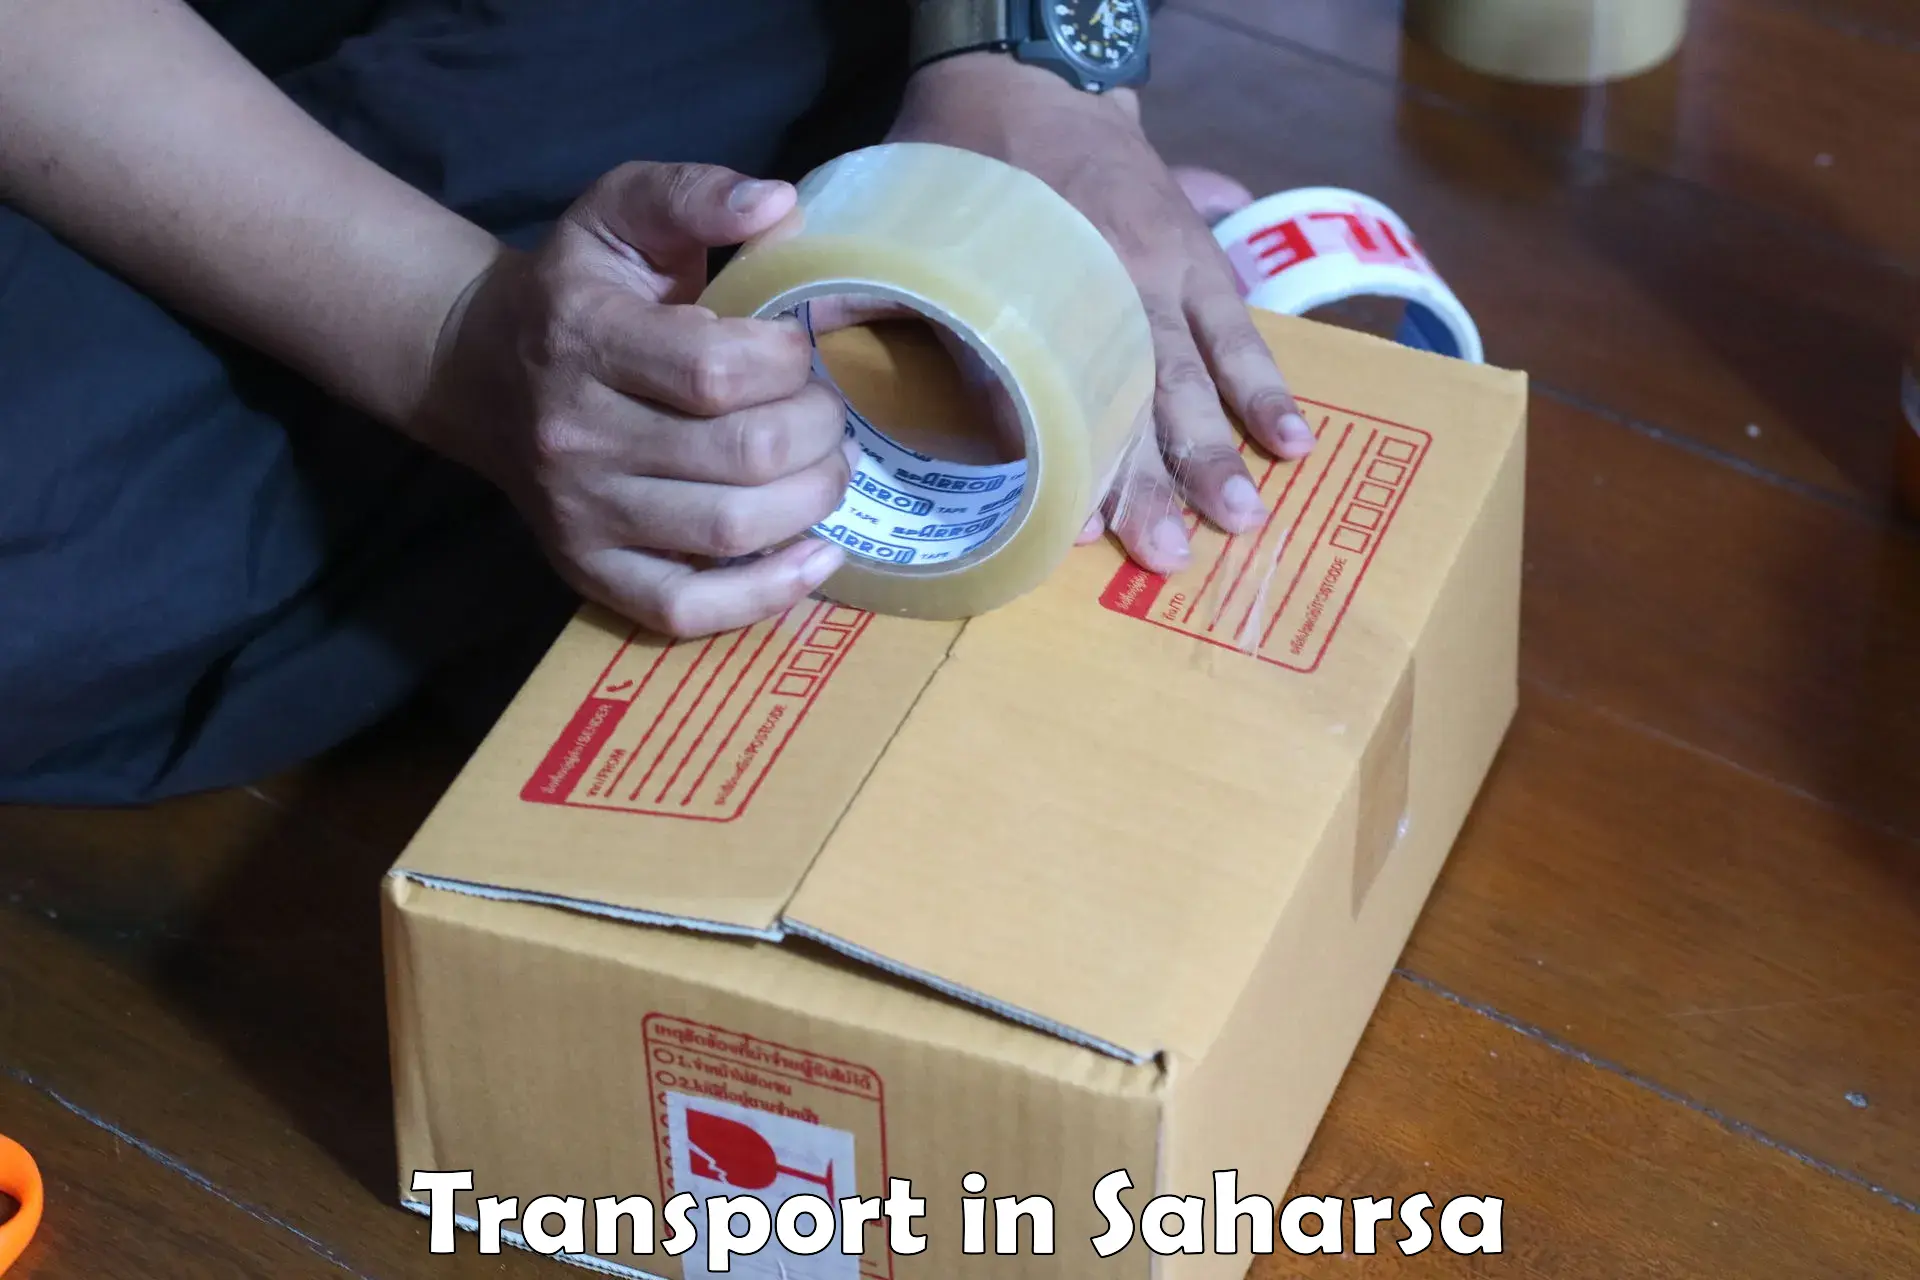 Air freight transport services in Saharsa